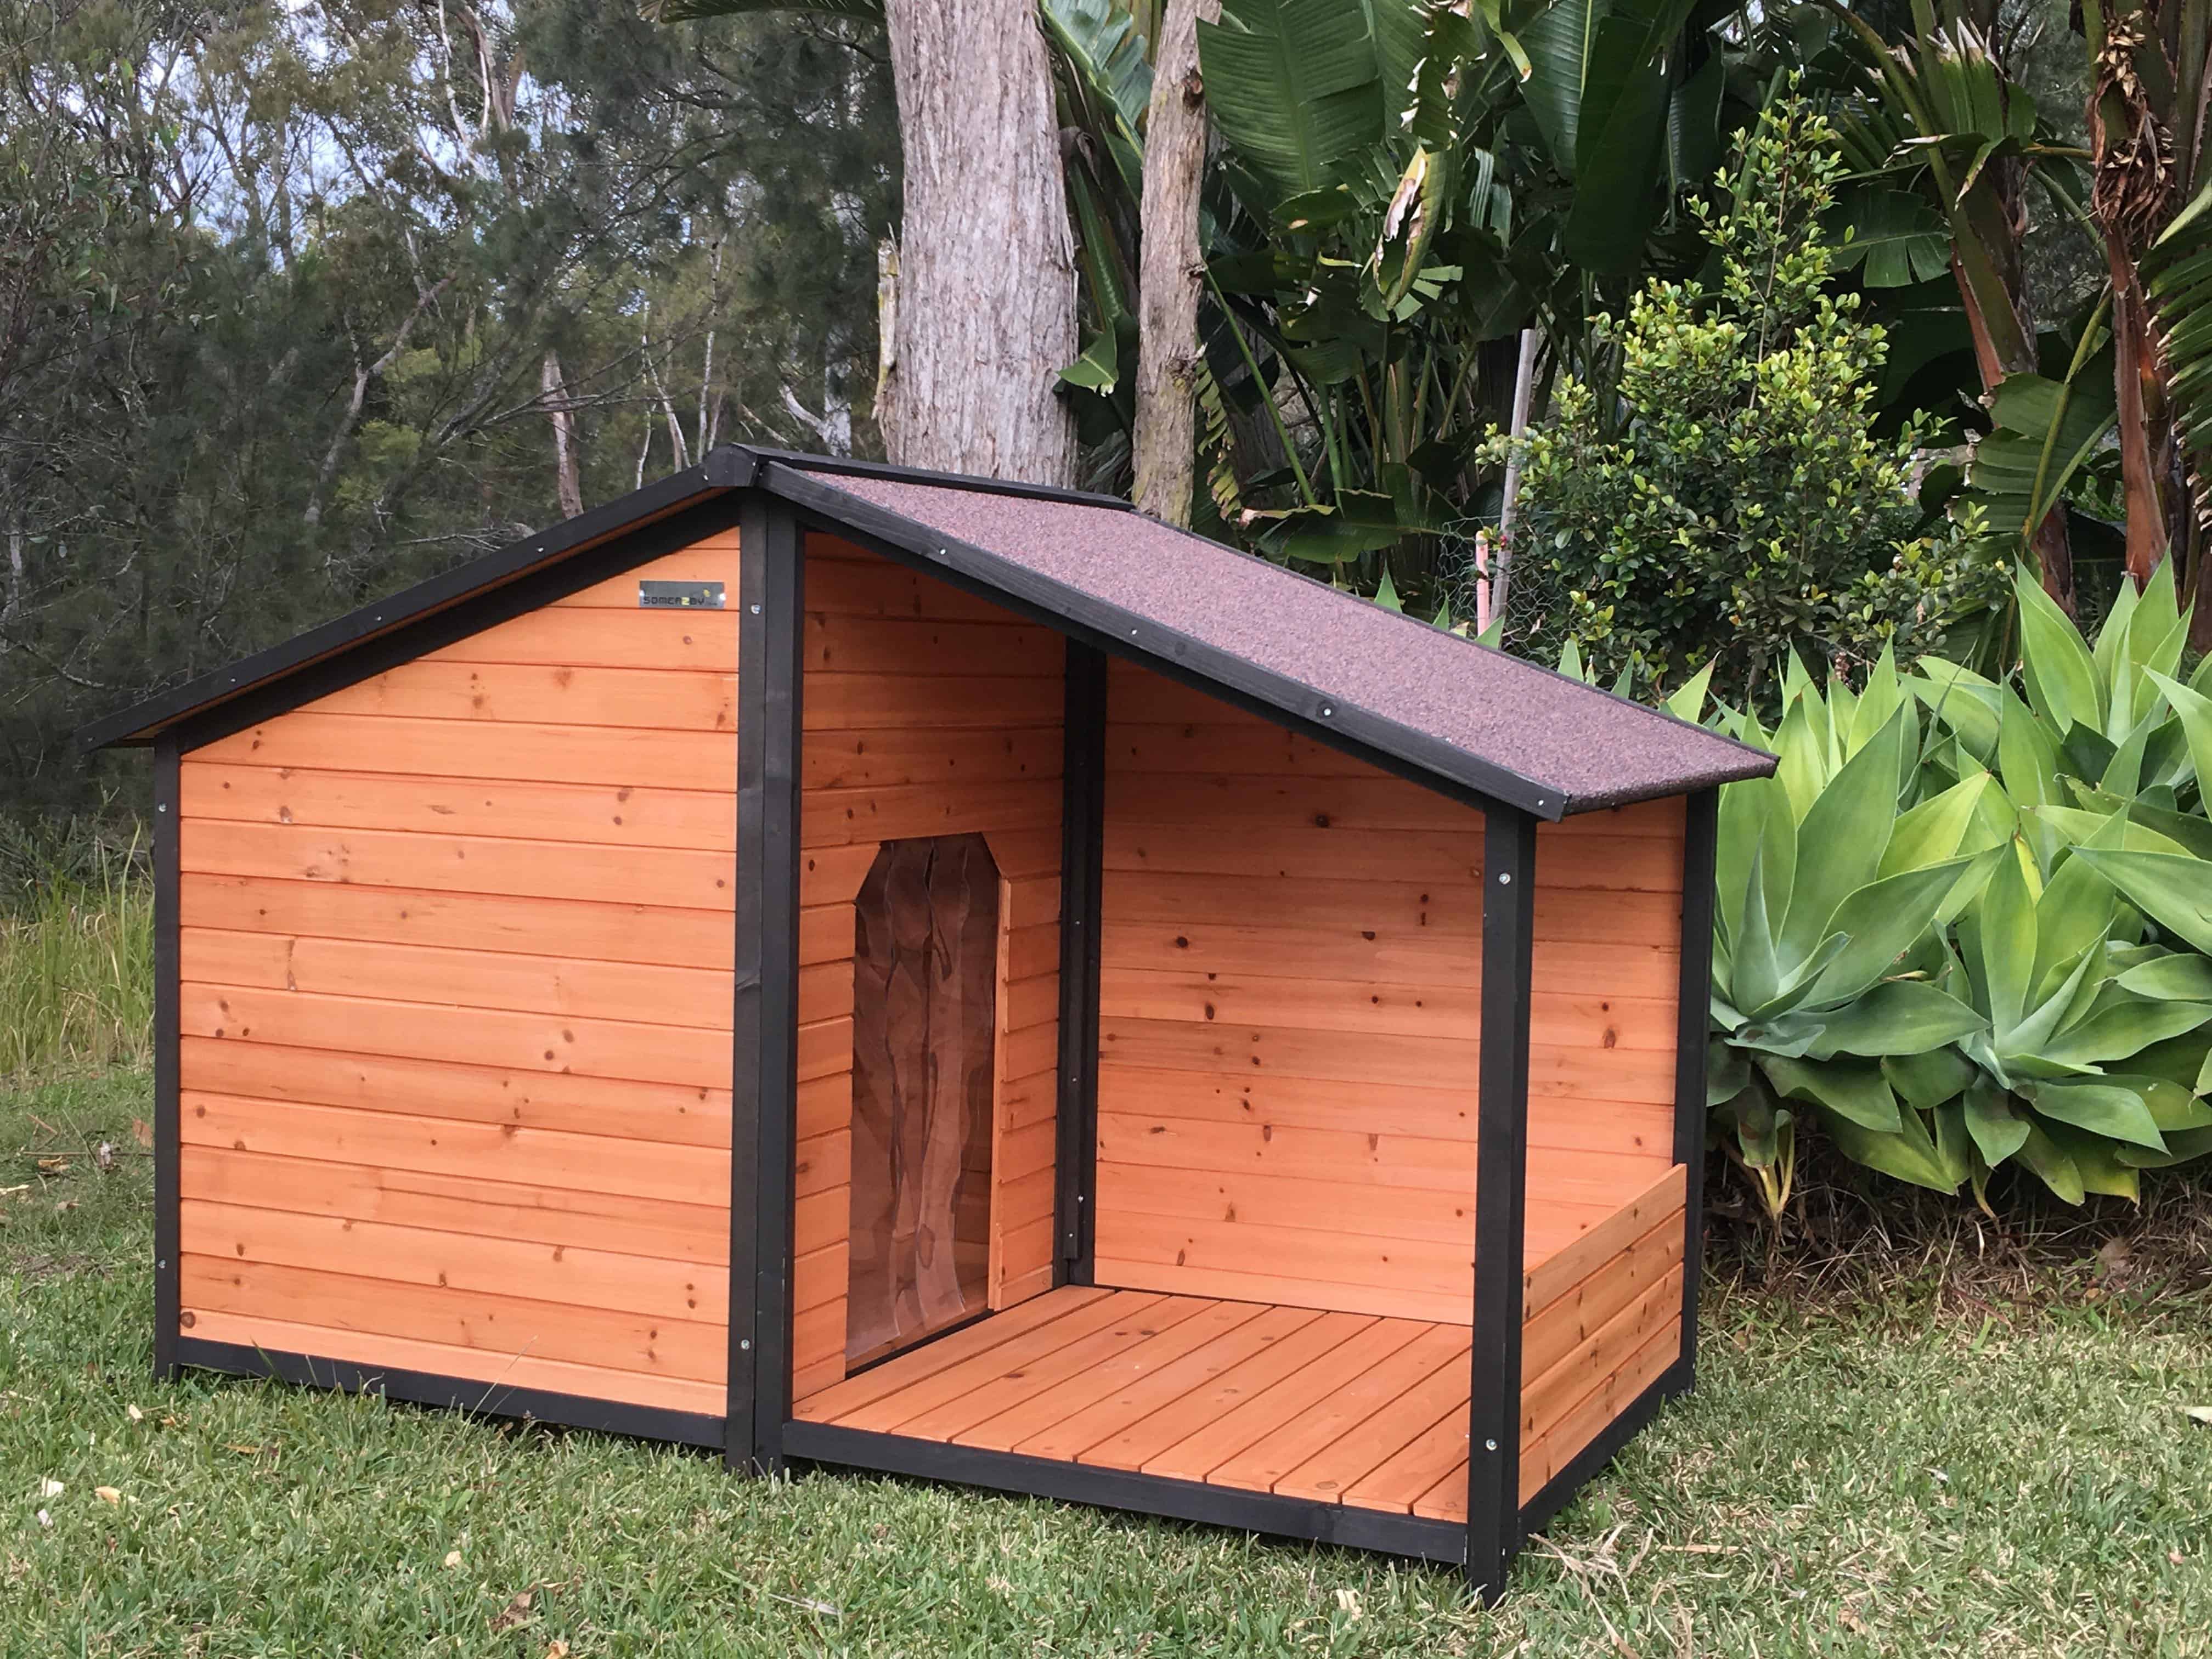 The Royale XXL Dog House by Somerzby